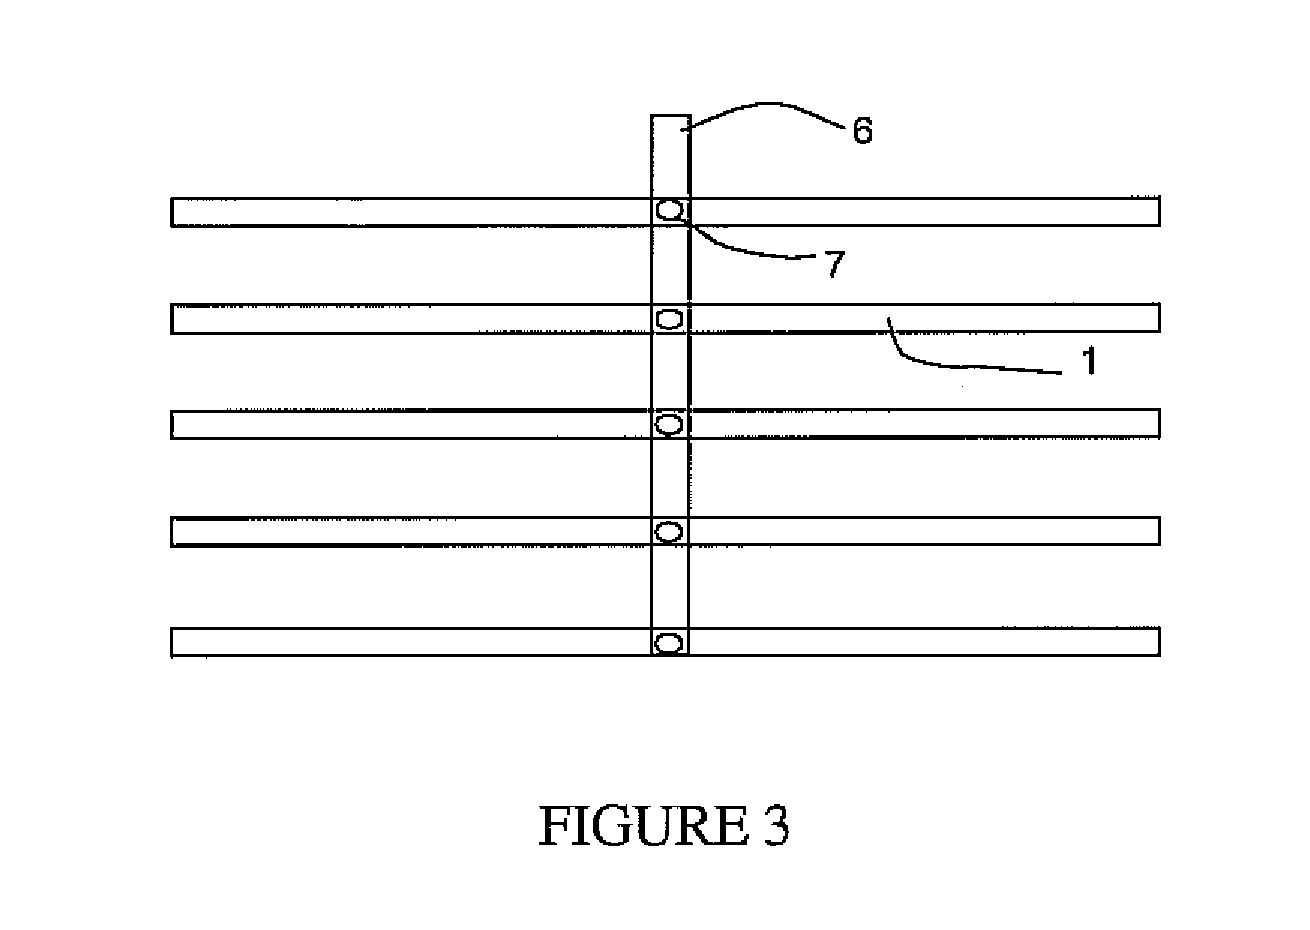 Corrosion control method and apparatus for reinforcing steel in concrete structures